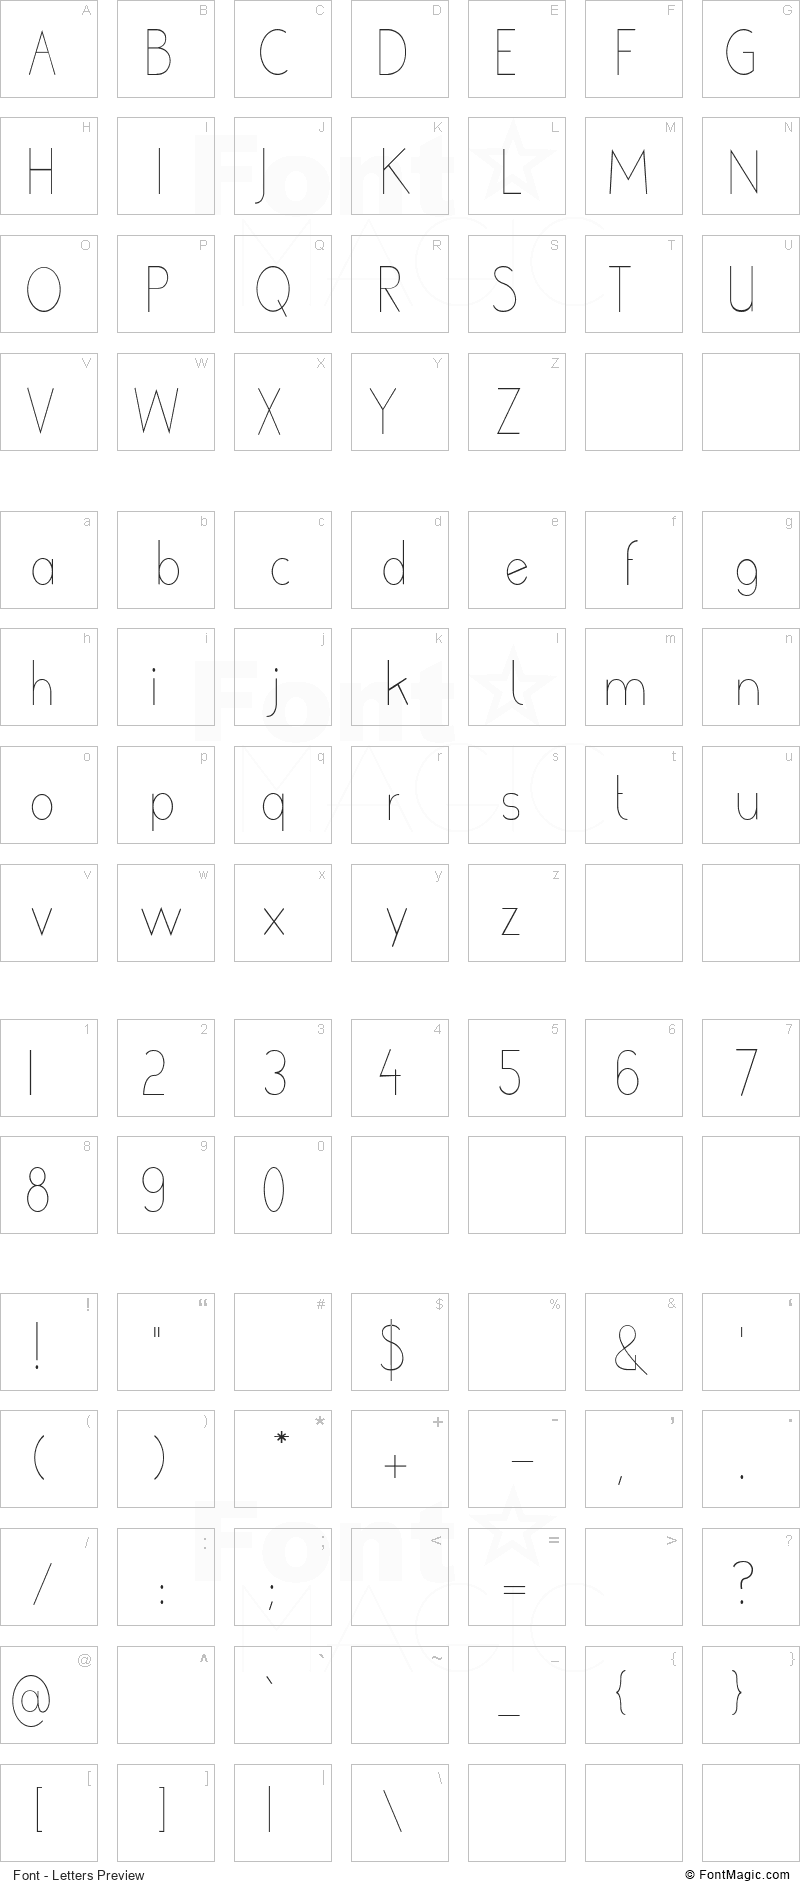 Poor Weekdays Font - All Latters Preview Chart